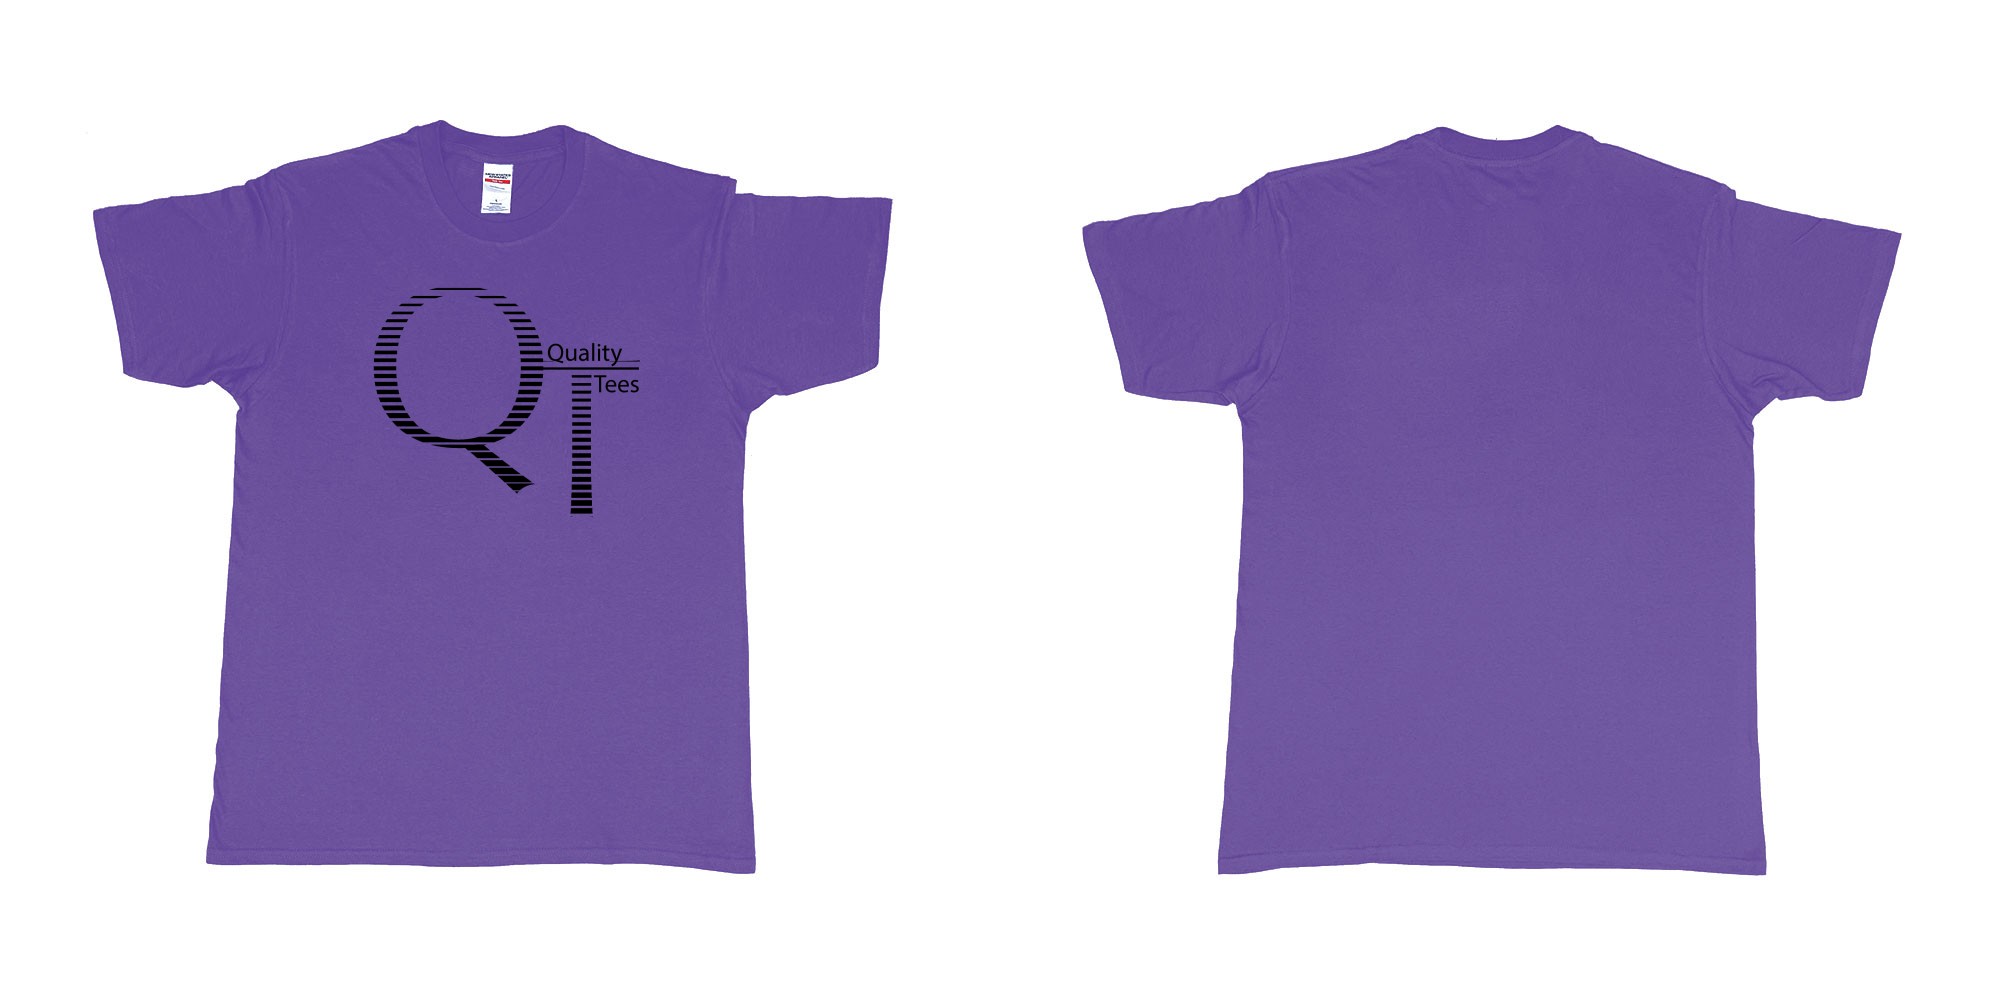 Custom tshirt design quality teeshirts in fabric color purple choice your own text made in Bali by The Pirate Way